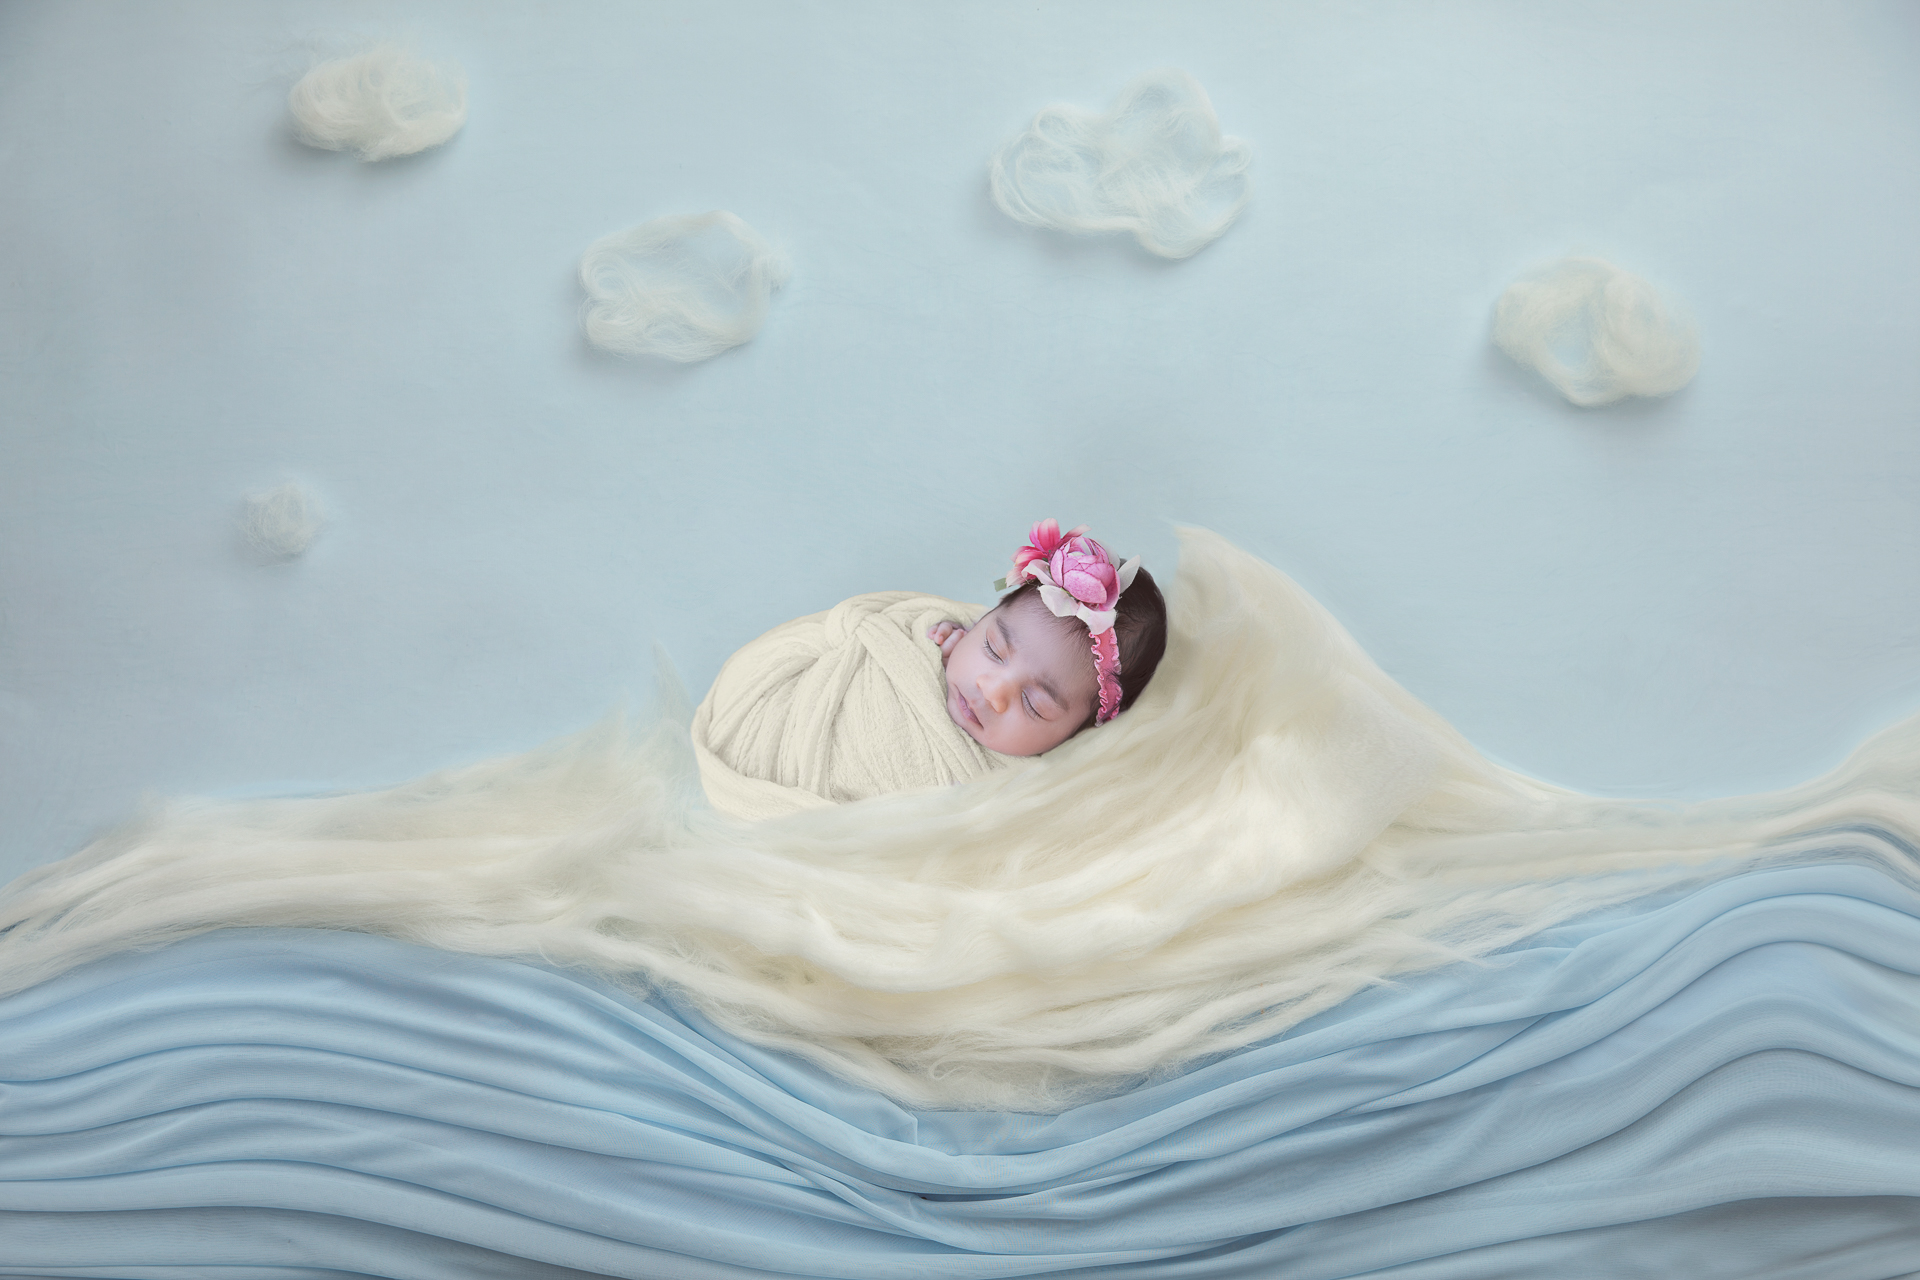 Newborn girl wearing light color wrap and pink headband appears to float on an ocean made up set up.